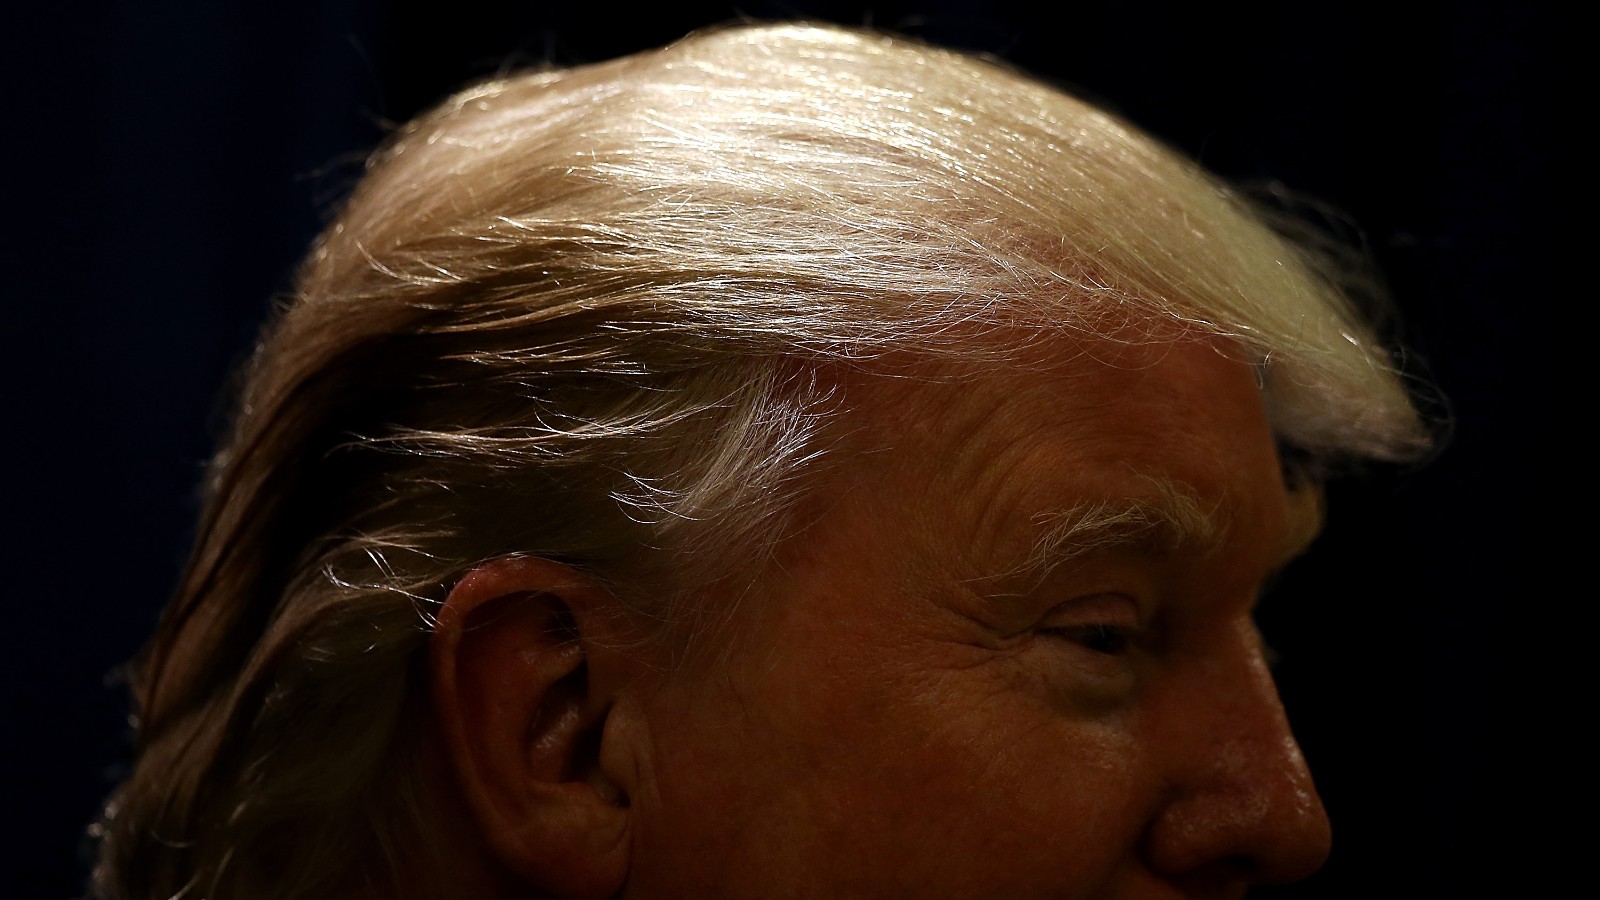 Trumps Comb Over And The Psychology Of Male Hairstyles Cnn